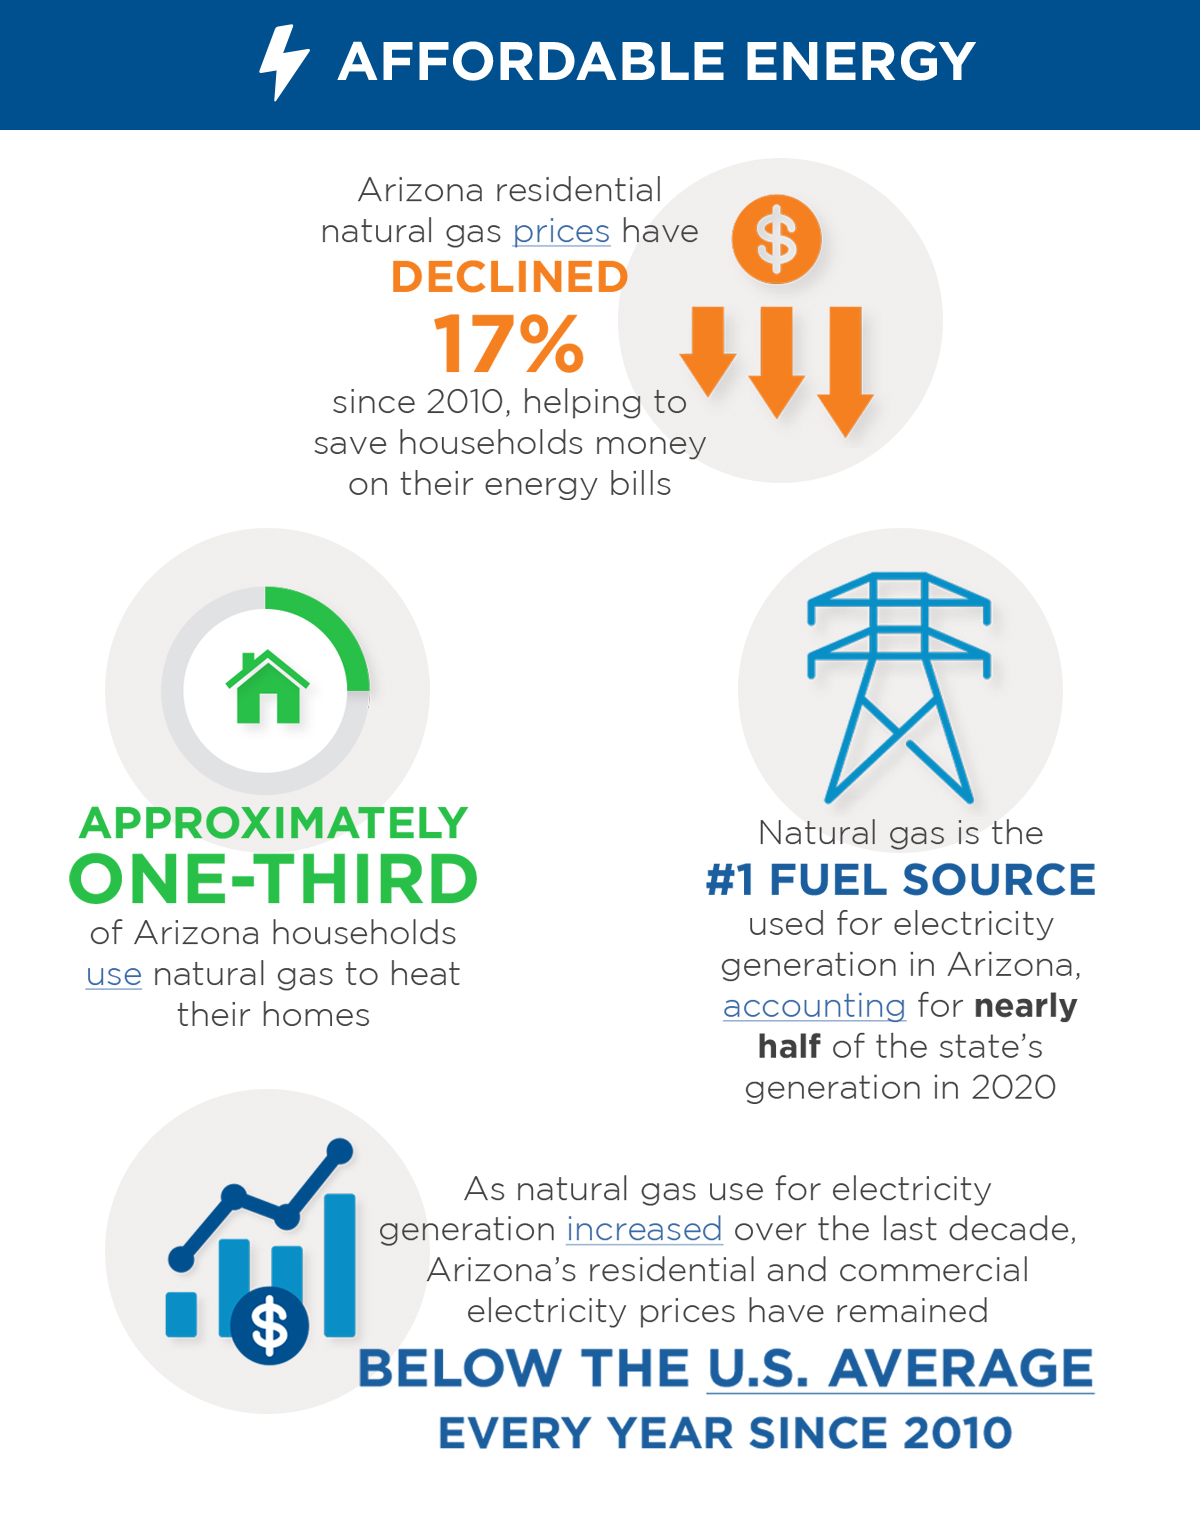 The benefits of natural gas for Arizona